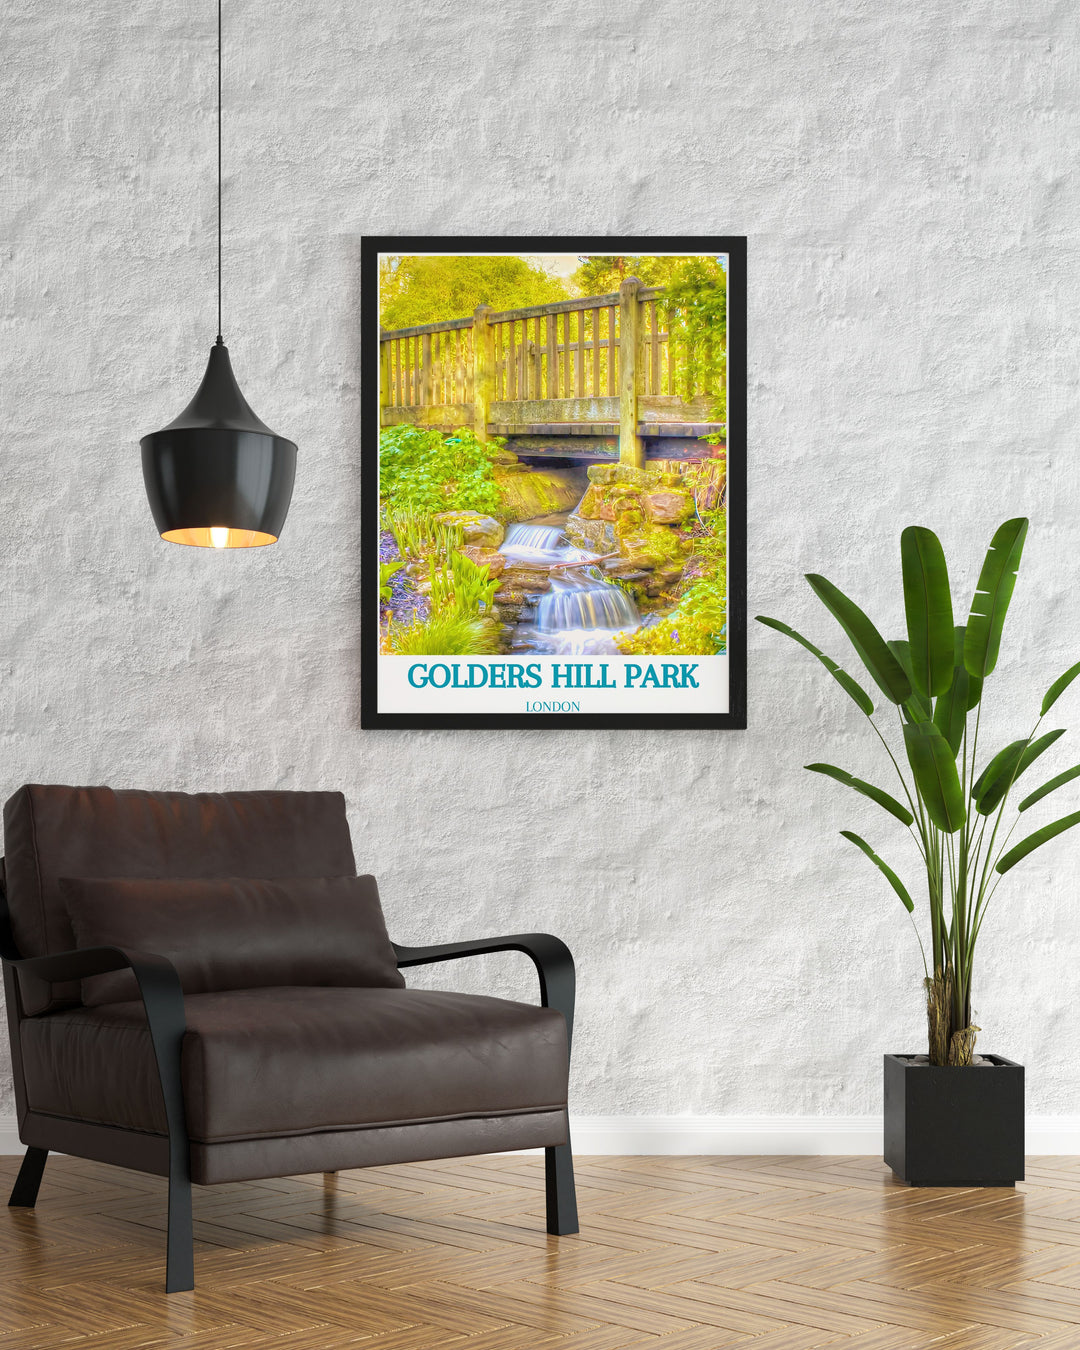 Travel poster of Golders Hill Park, London, showcasing the picturesque Water Gardens and peaceful atmosphere, a must have for any travel art enthusiast.